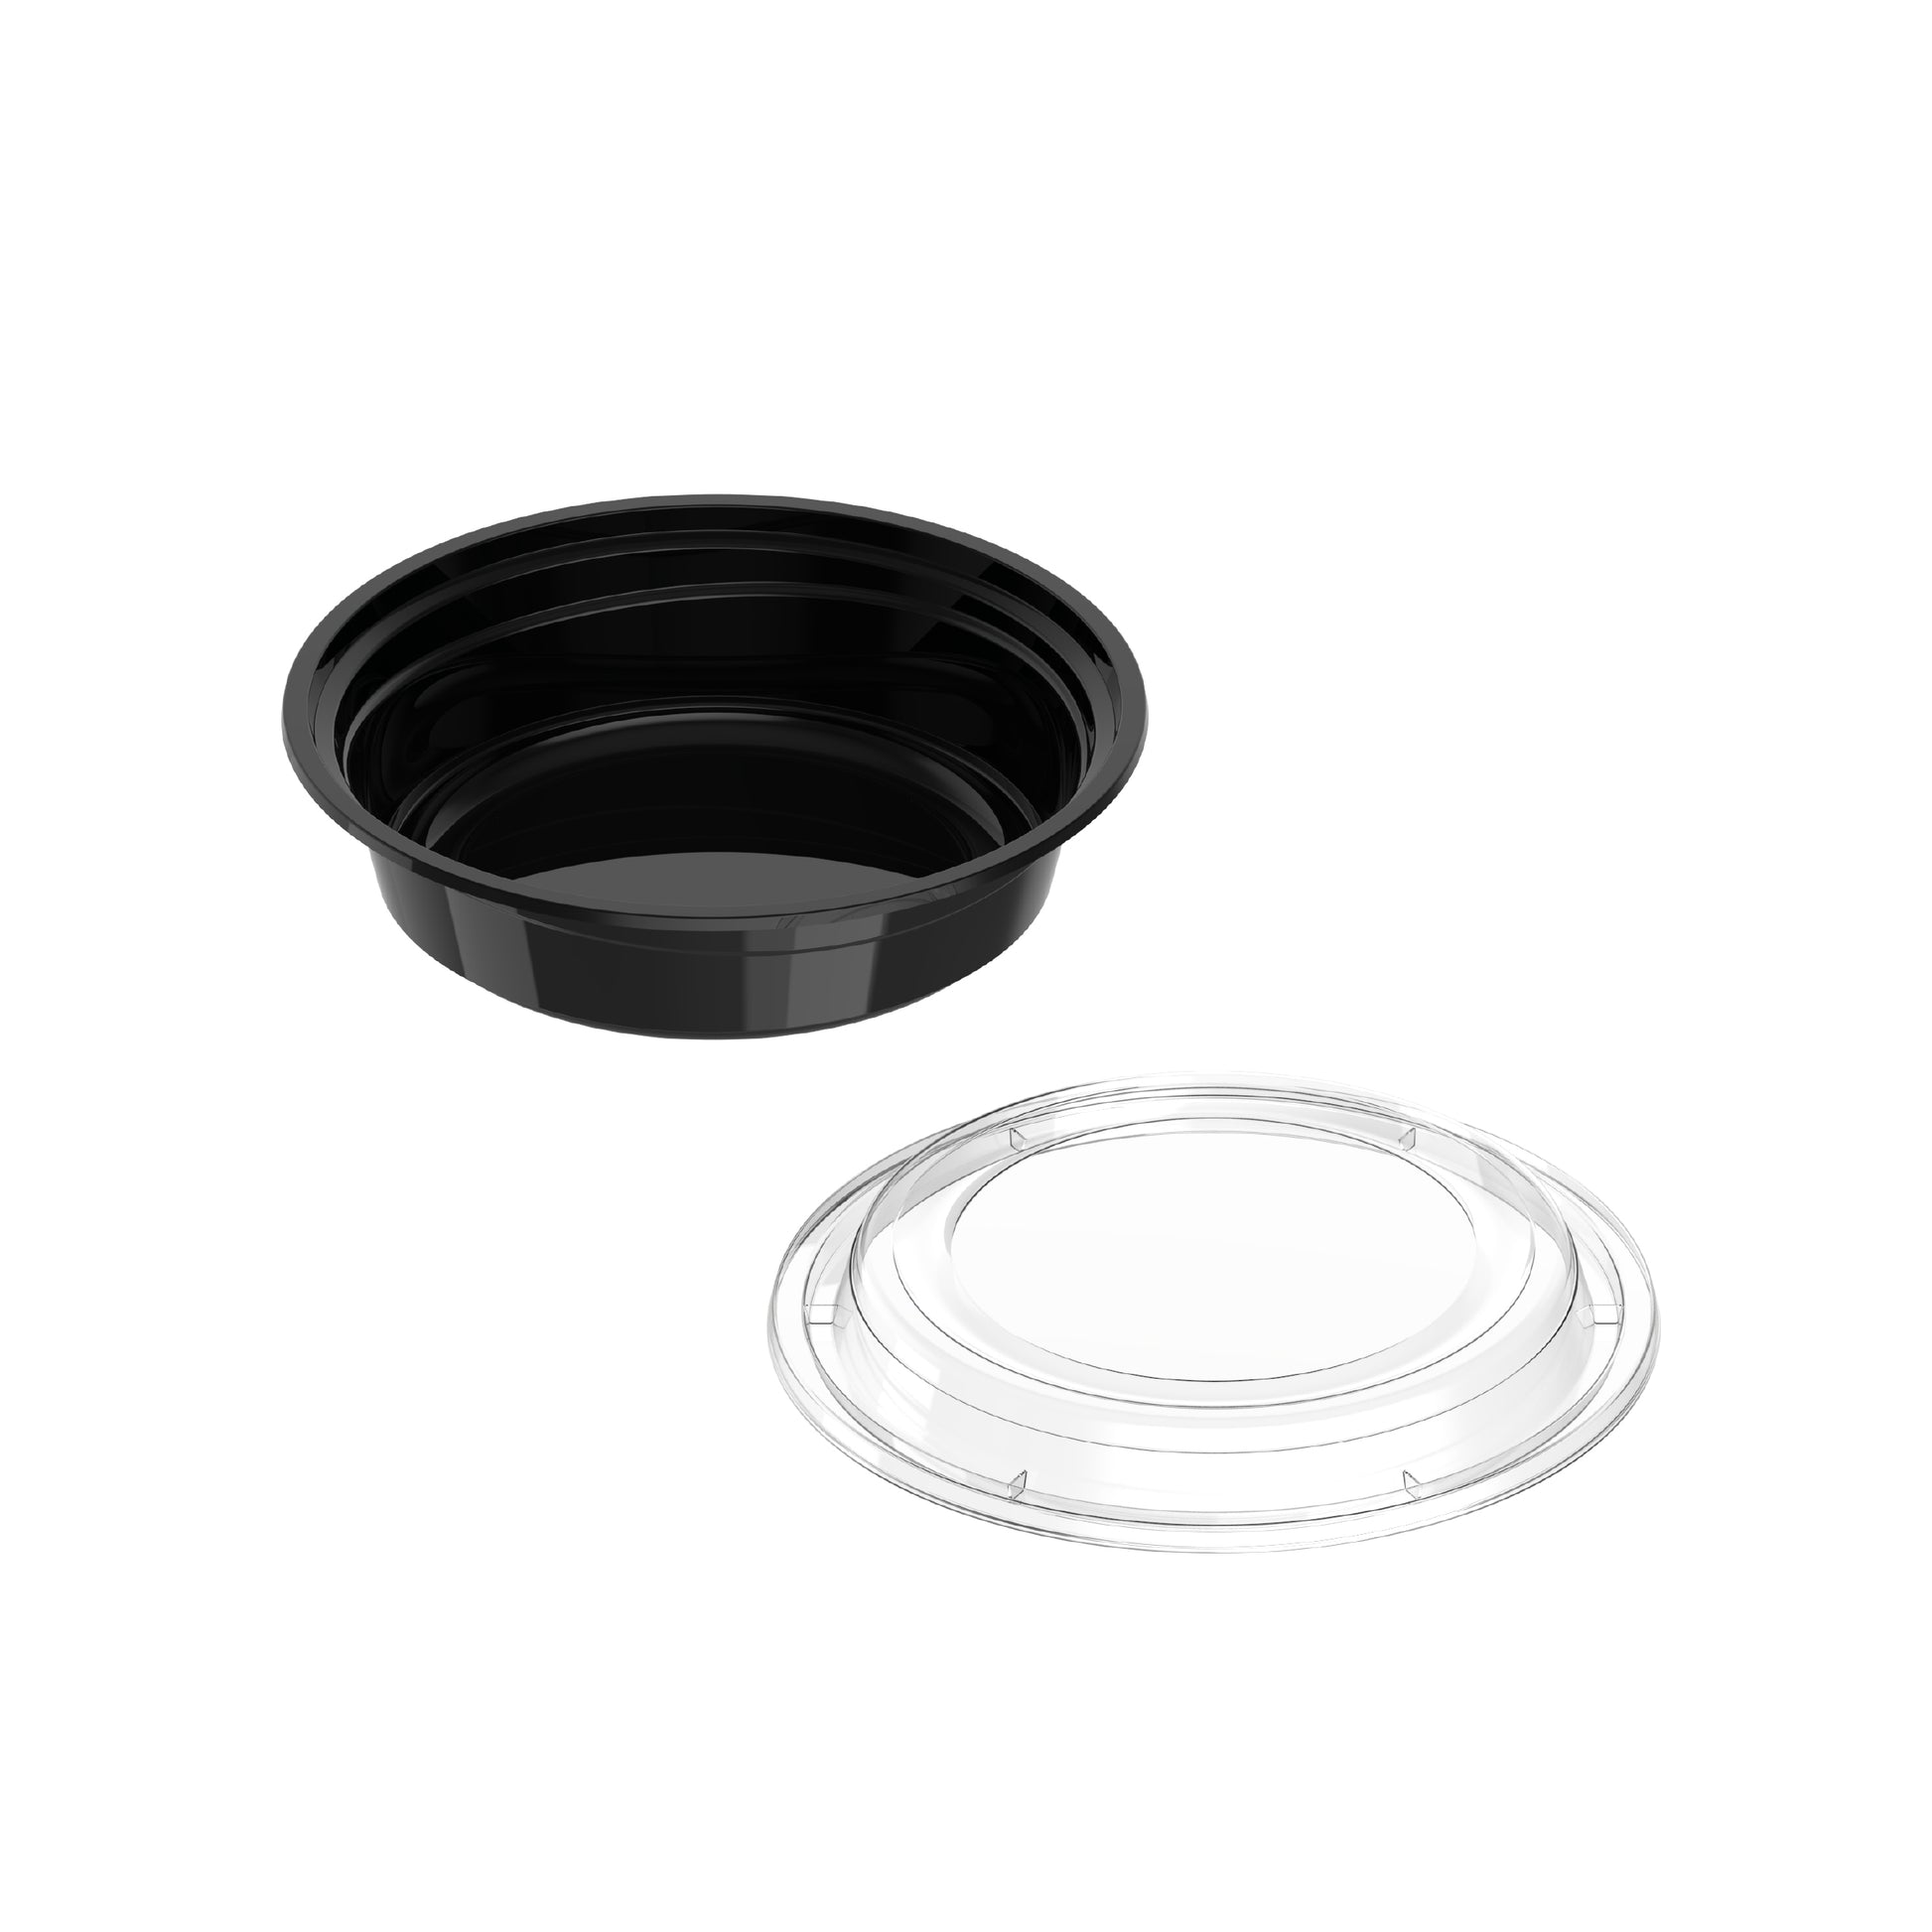 475 ml Pack of 10 RO16 Black Microwave Containers with Clear Lids